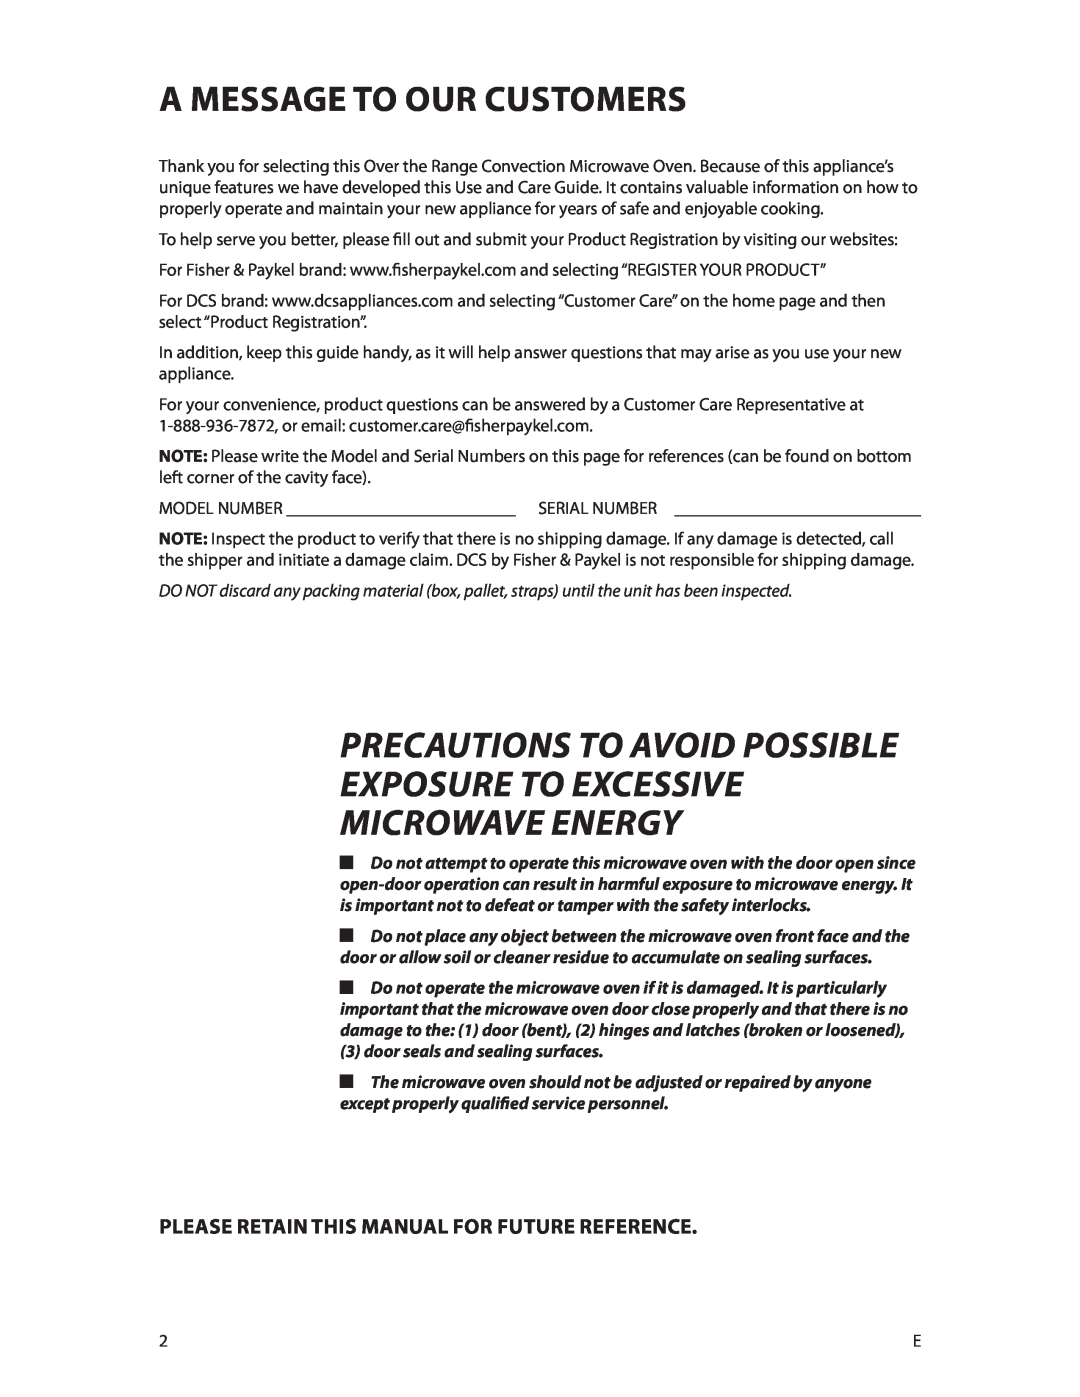 DCS CMOH30SS manual A Message To Our Customers, Precautions To Avoid Possible Exposure To Excessive Microwave Energy 